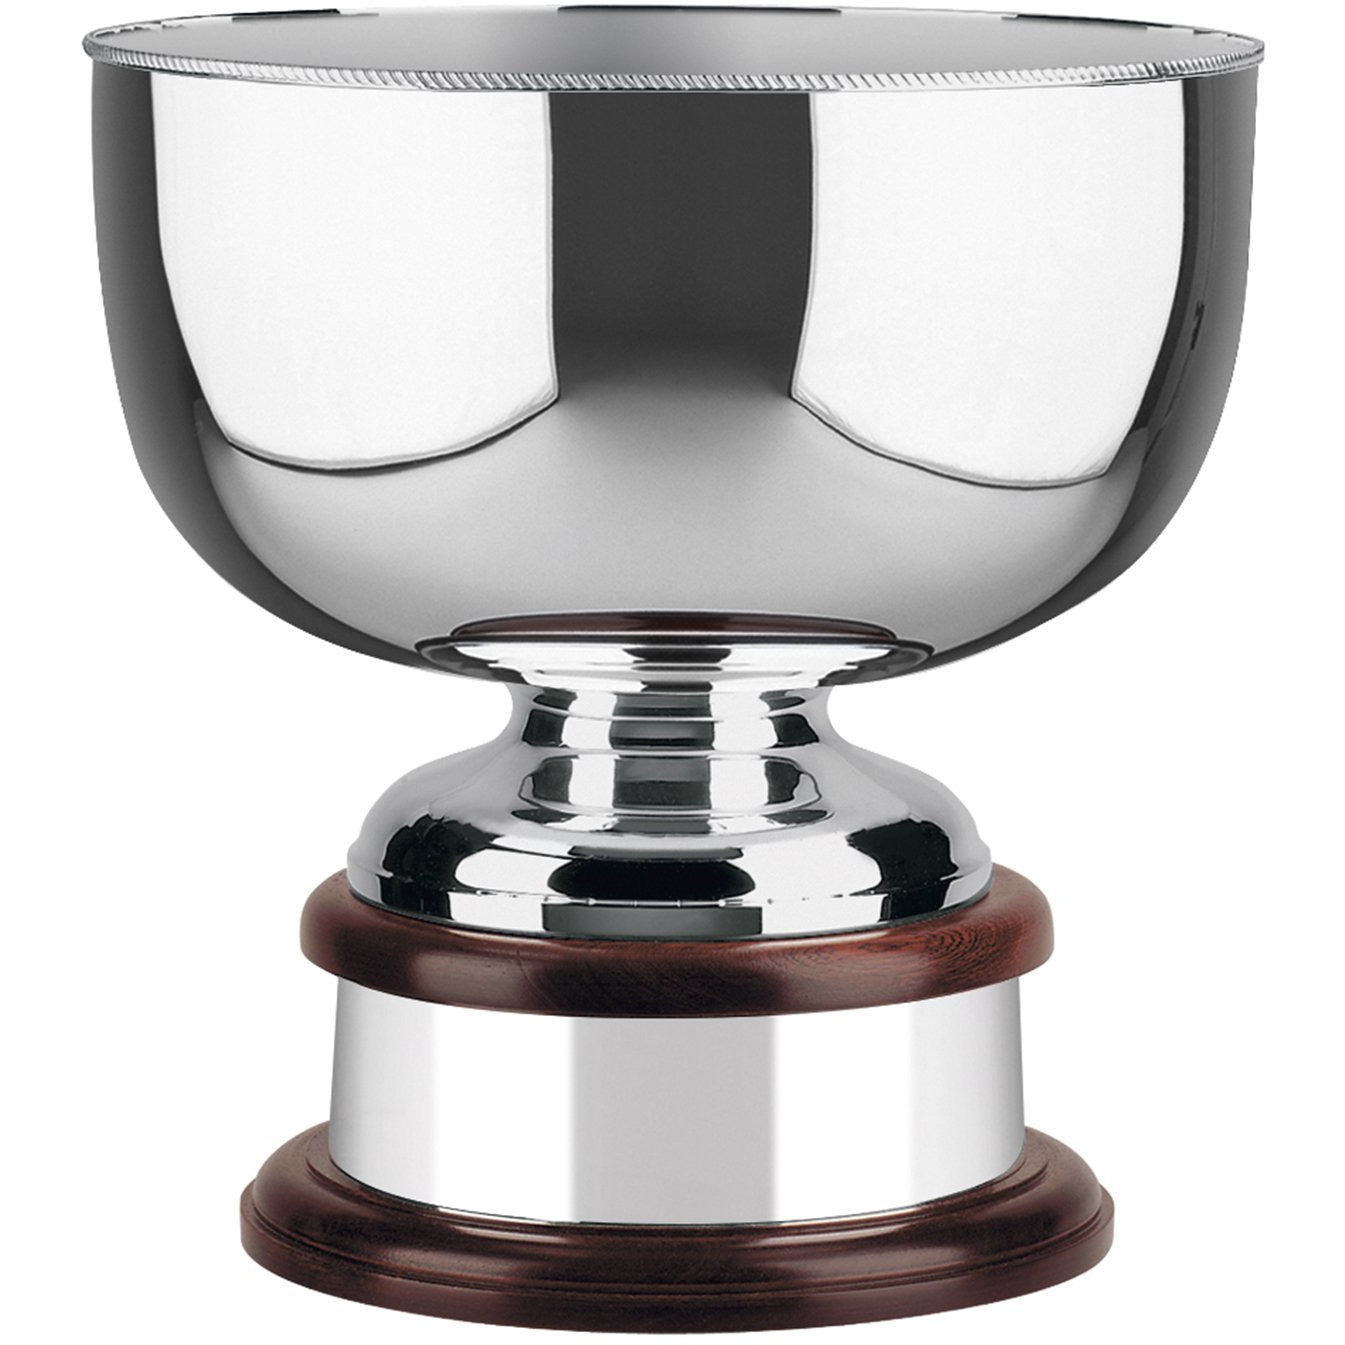 Silver Plated Personalised Supreme Trophy Bowl